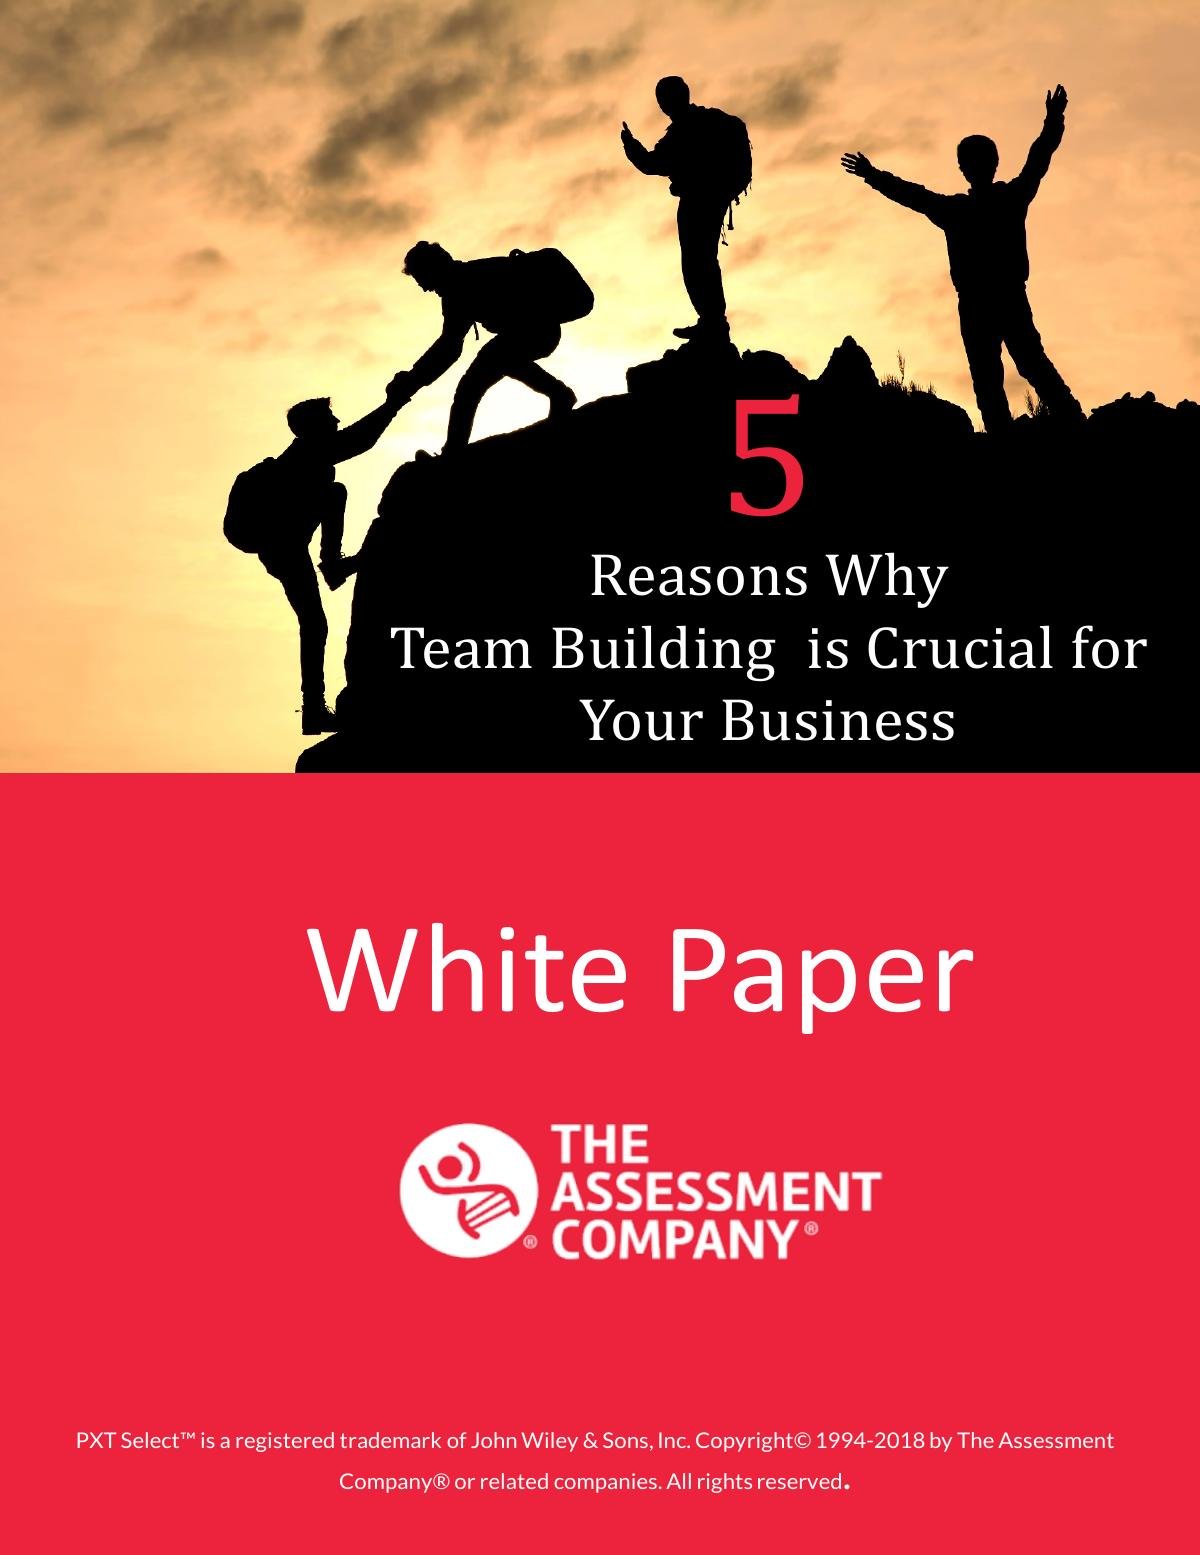 5 Reasons Why Team Building is Crucial for Your Business